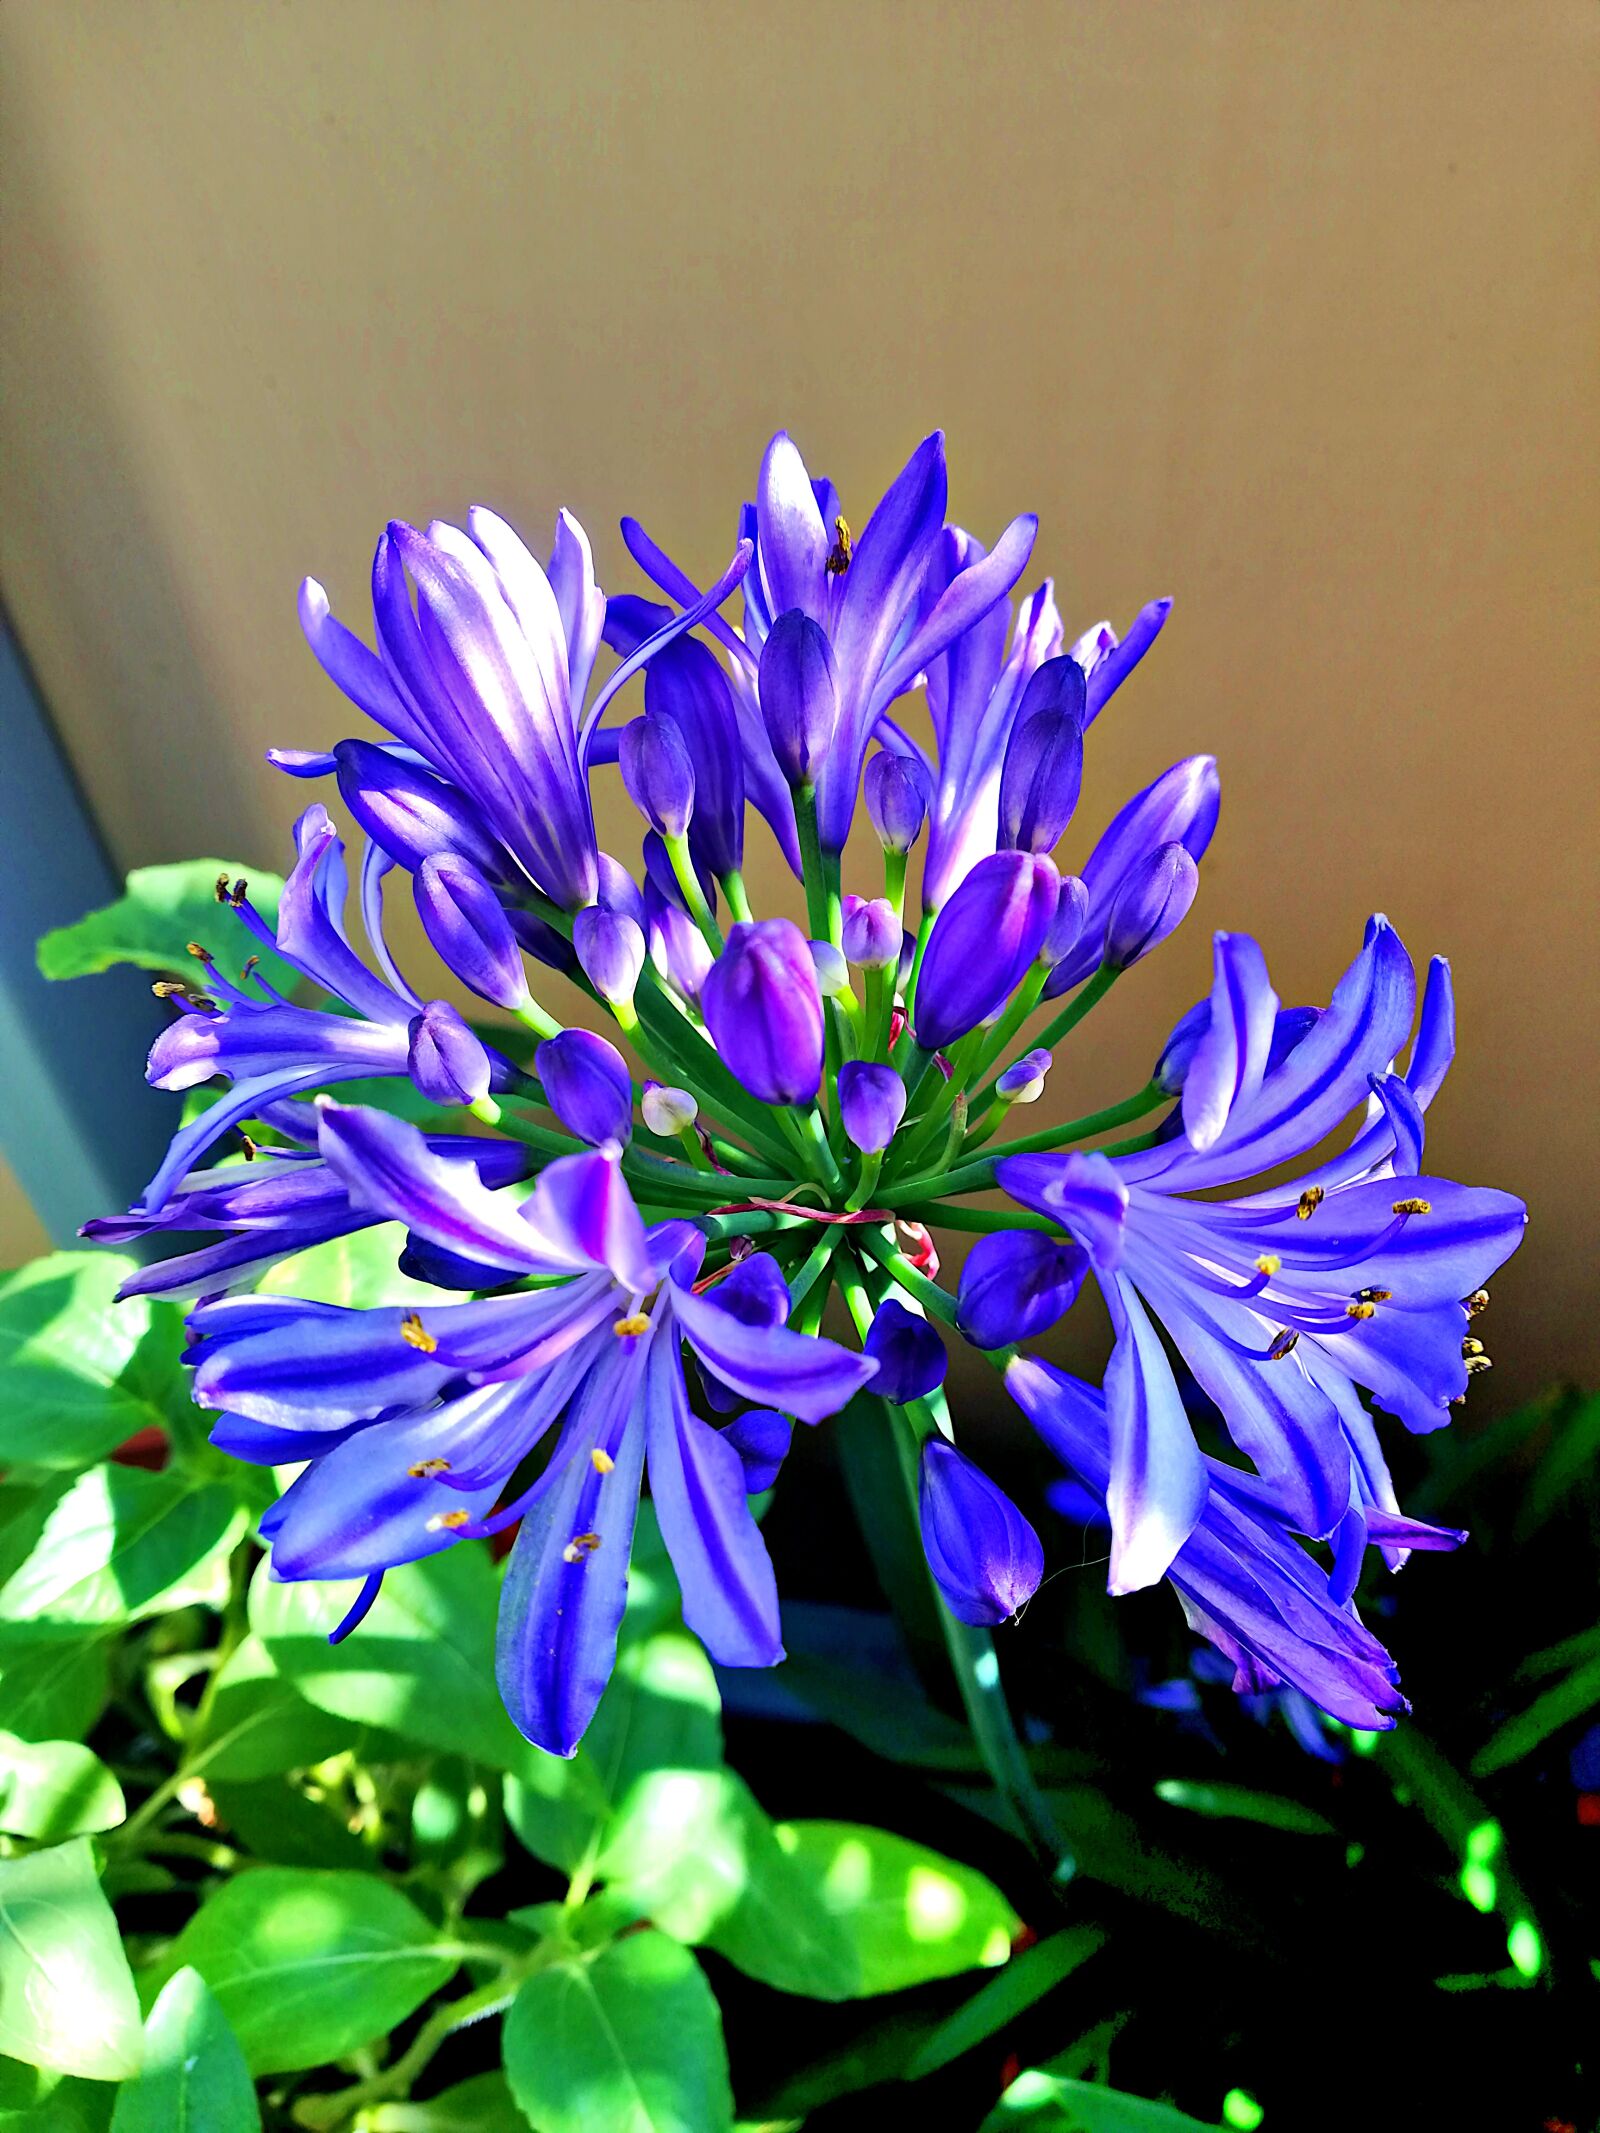 HUAWEI Mate 10 Lite sample photo. Agapanthus, flower, blossom photography